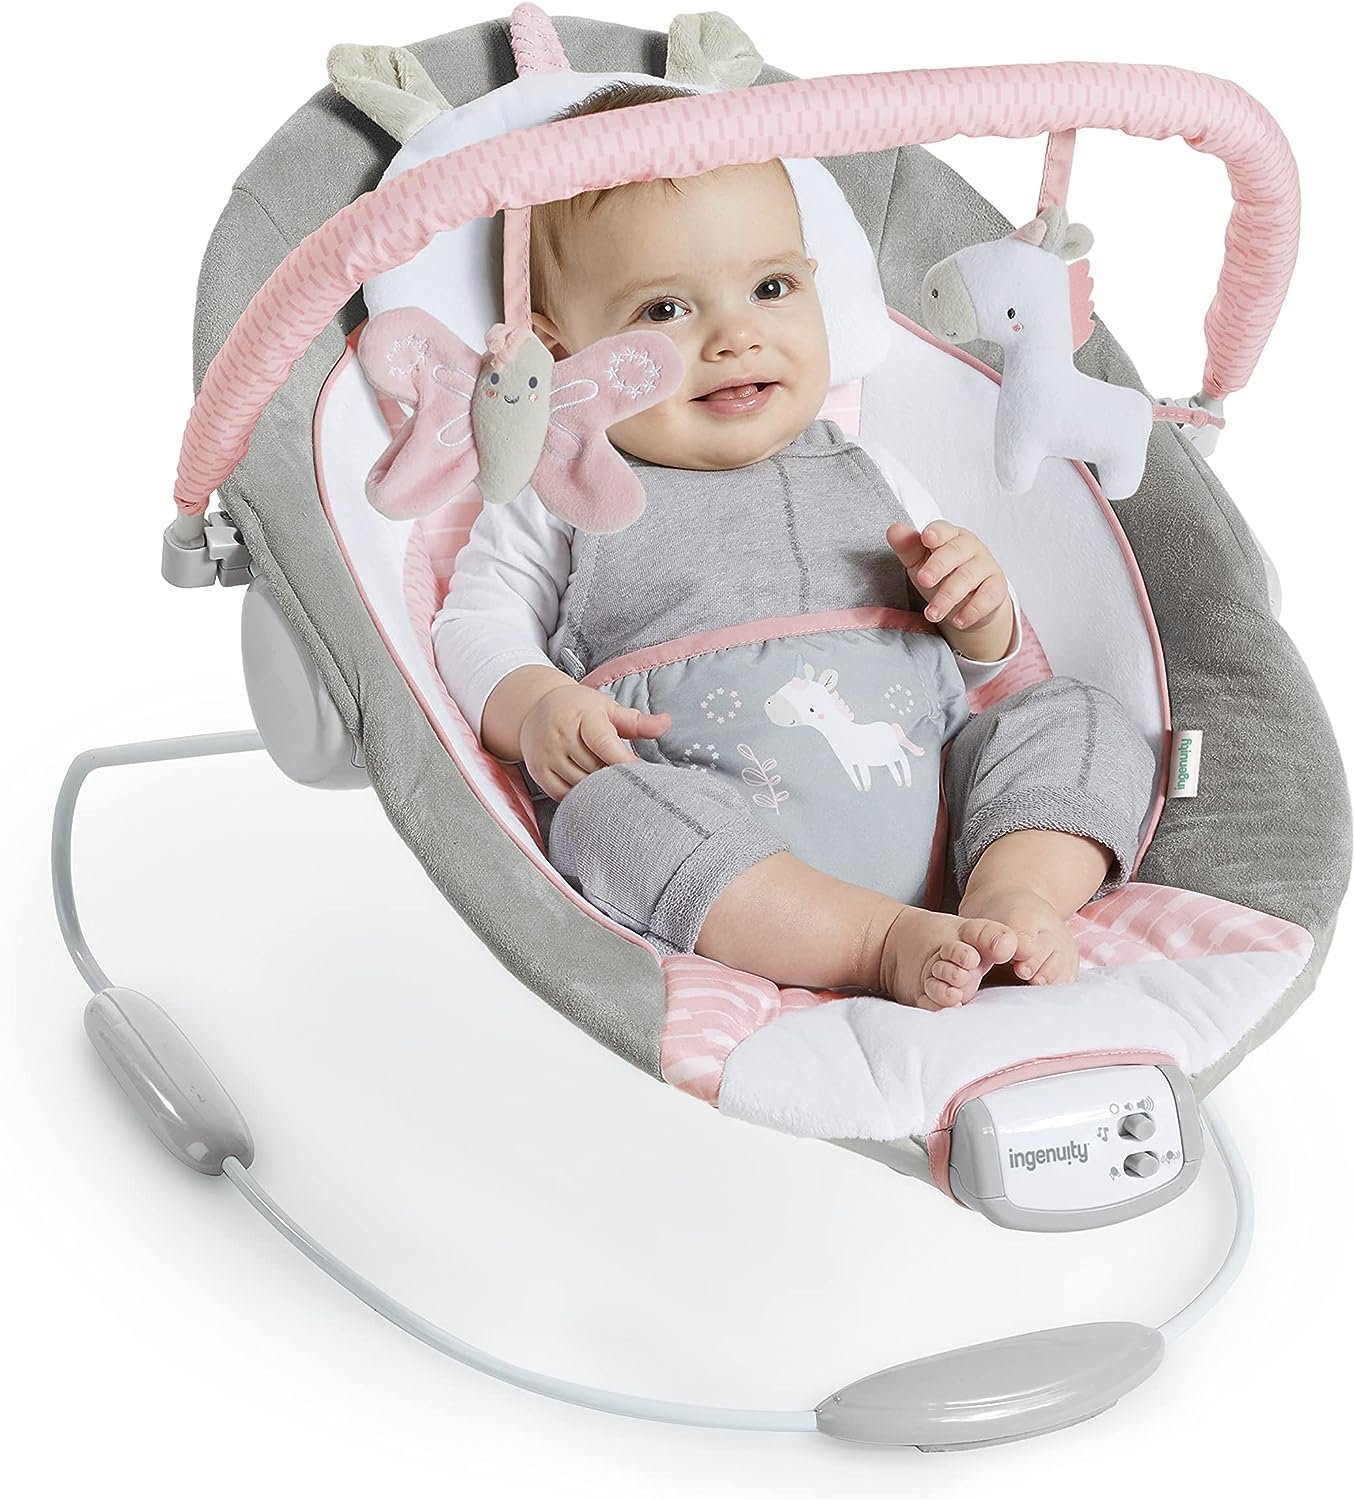 Ingenuity Soothing Baby Bouncer Infant Seat with Vibrations, -Toy Bar  Sounds, 0-6 Months Up to 20 lbs (Pink Flora the Unicorn)